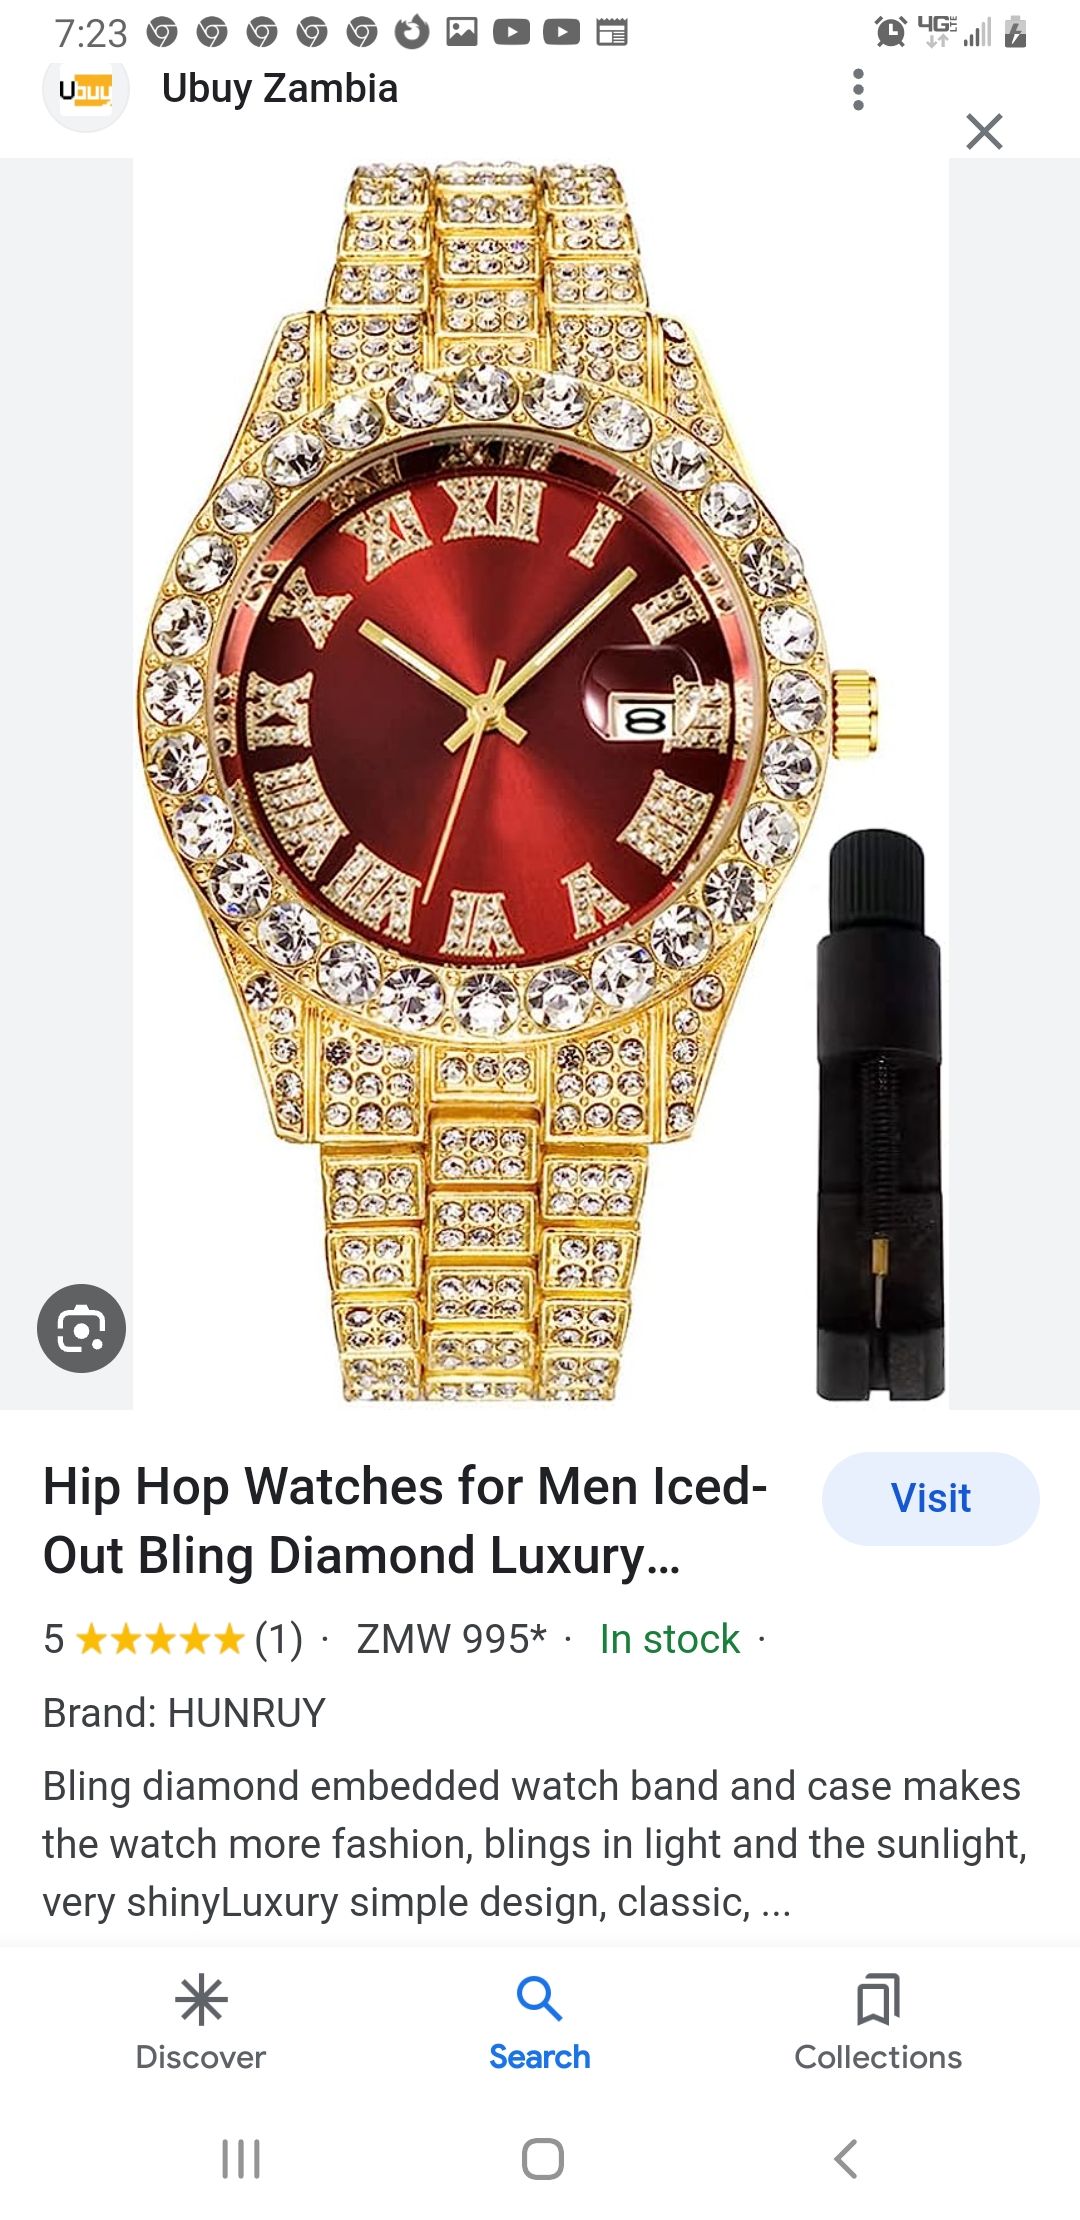 722909090000 LOOE oF. a
u Ubuy Zambia :

 

Hip Hop Watches for Men Iced- Visit
Out Bling Diamond Luxury...

5 (1) - ZMW 995* - In stock -

Brand: HUNRUY

Bling diamond embedded watch band and case makes
the watch more fashion, blings in light and the sunlight,
very shinyLuxury simple design, classic, ...

- Q A

Discover Search Collections

1 Oo 